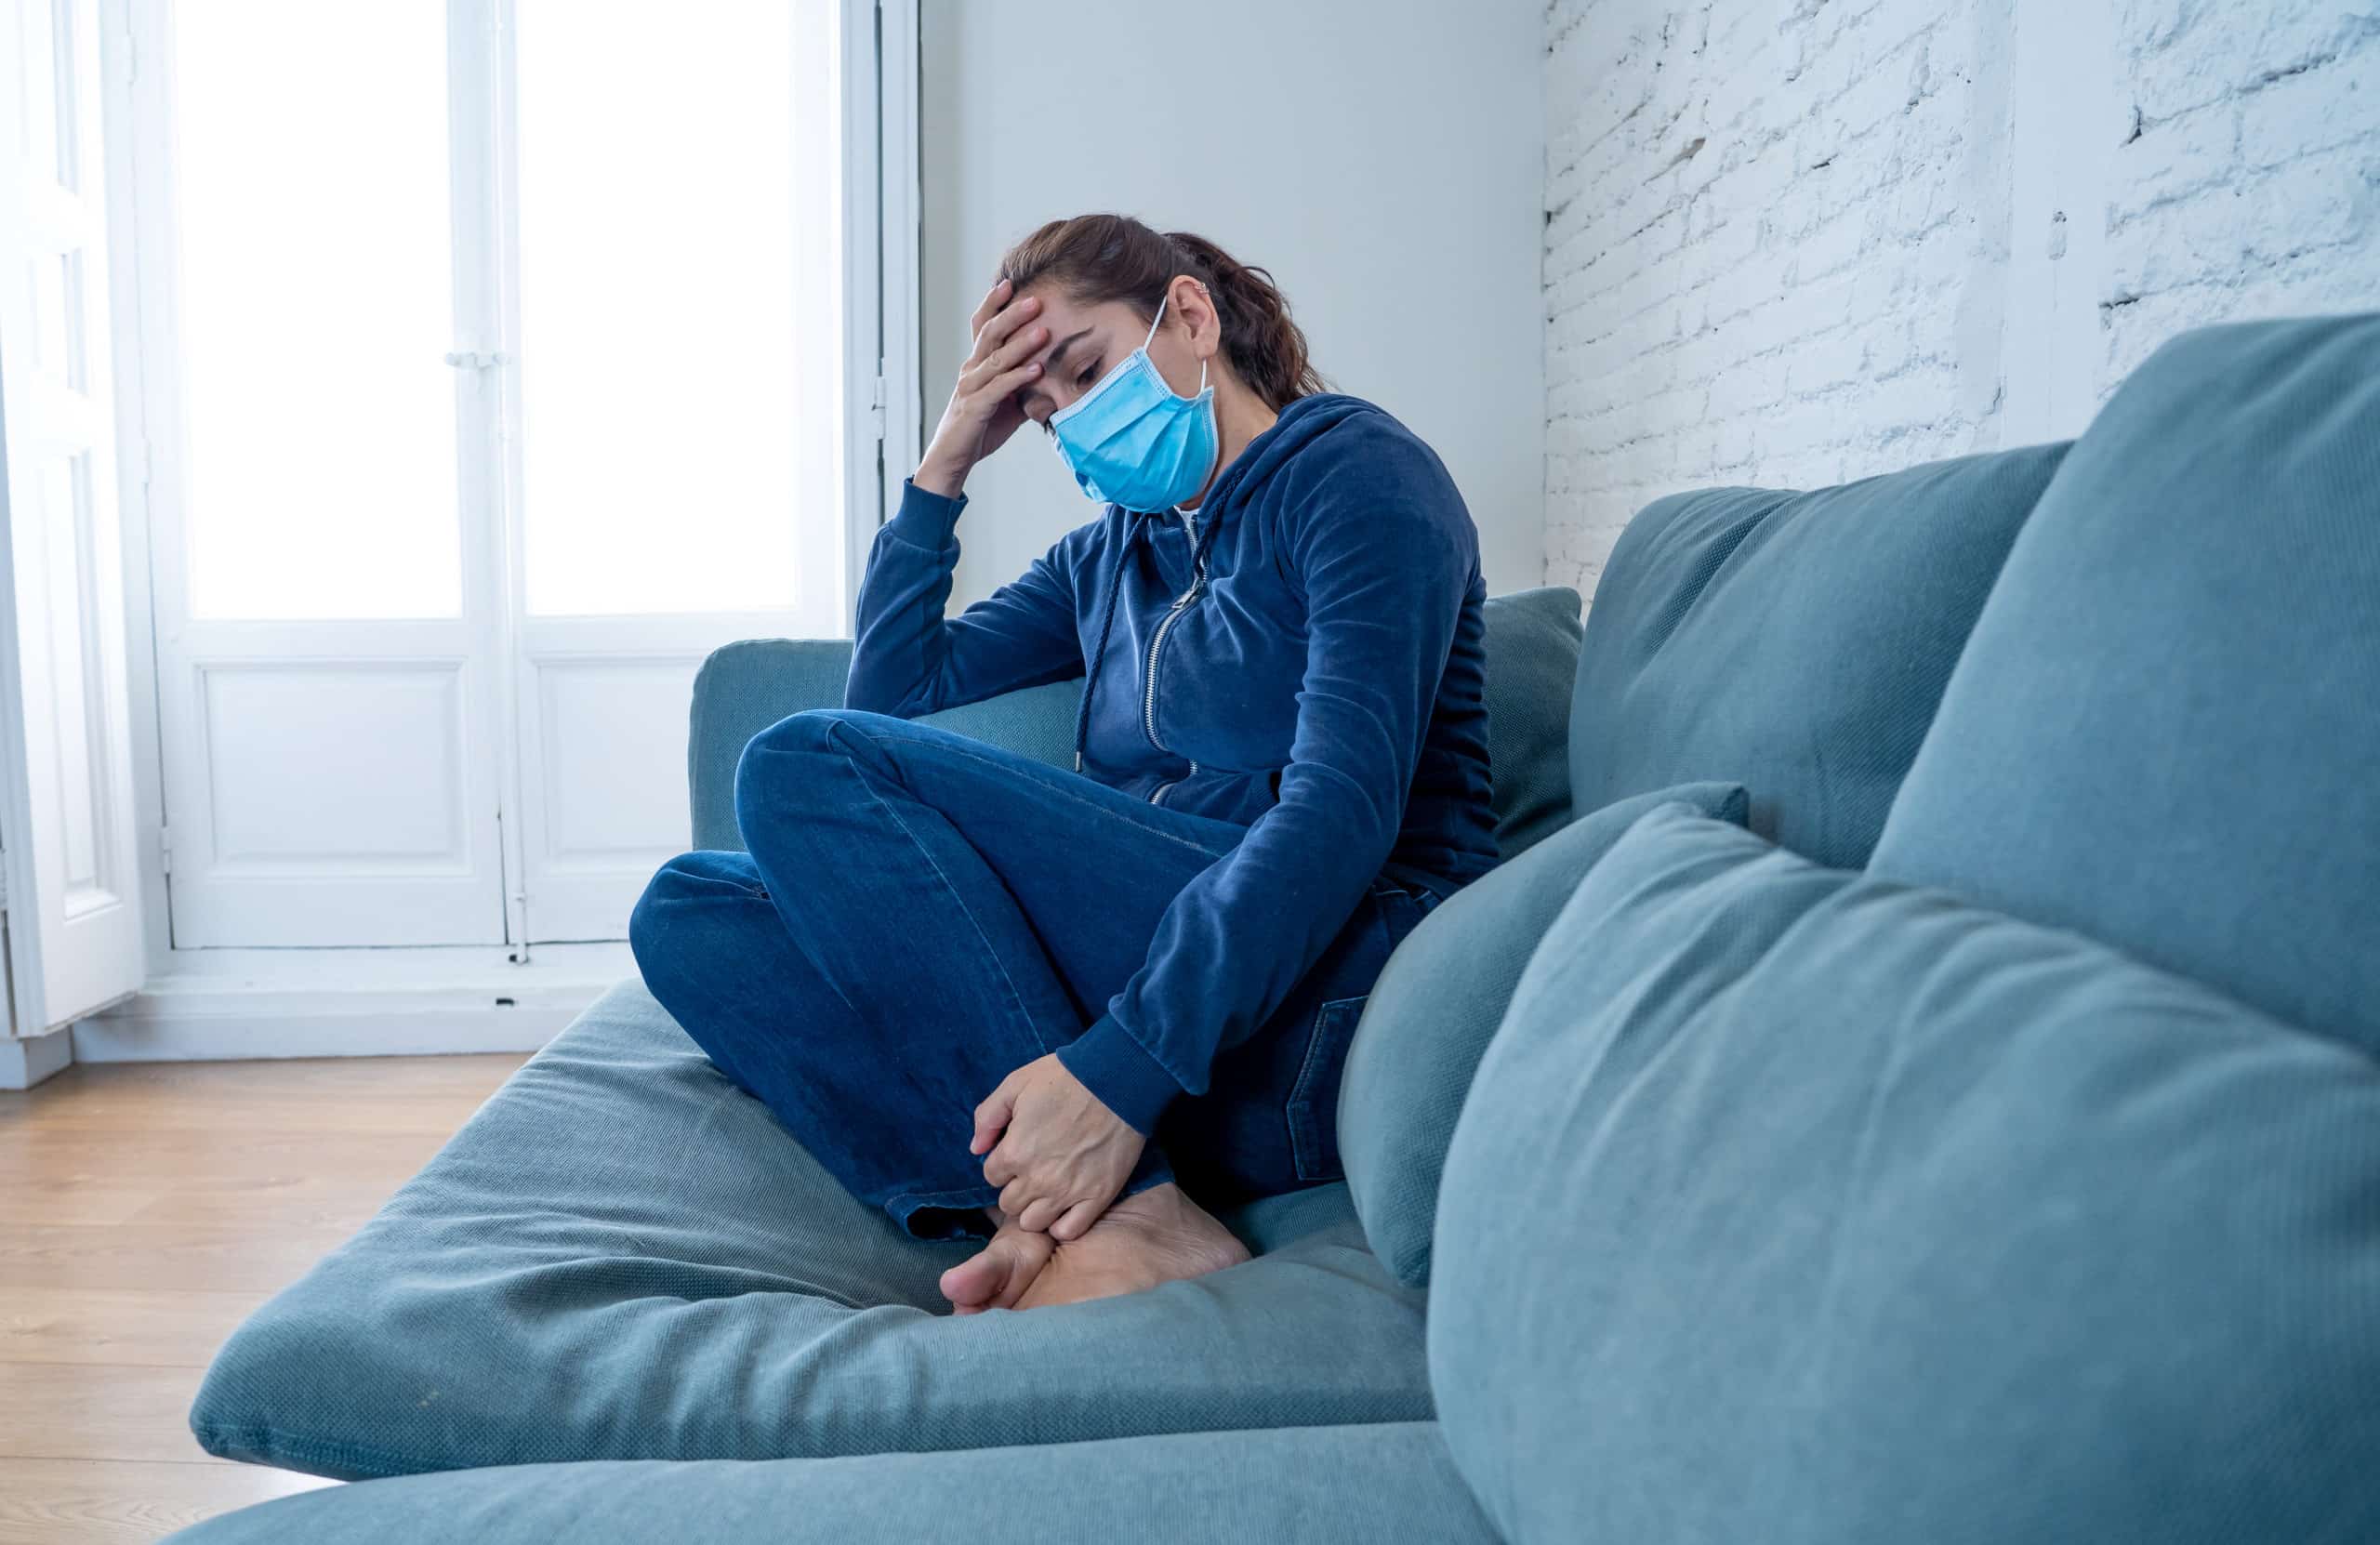 Sad woman sitting on the sofa with protective mask at home.